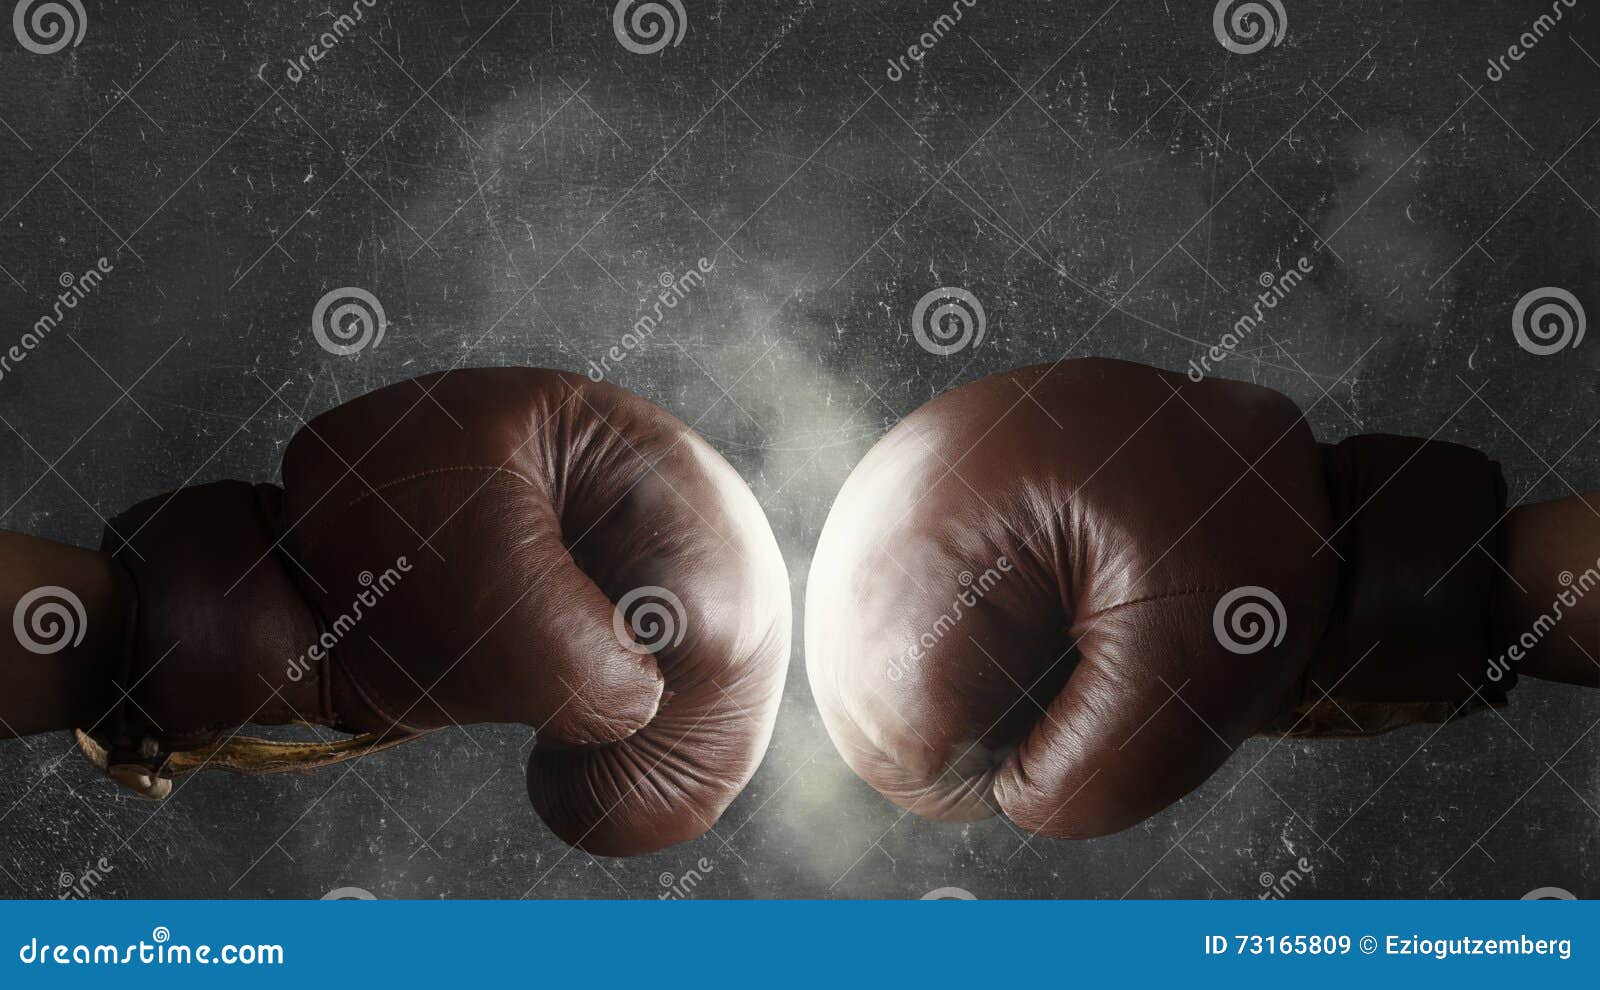 two old brown boxing gloves hit together